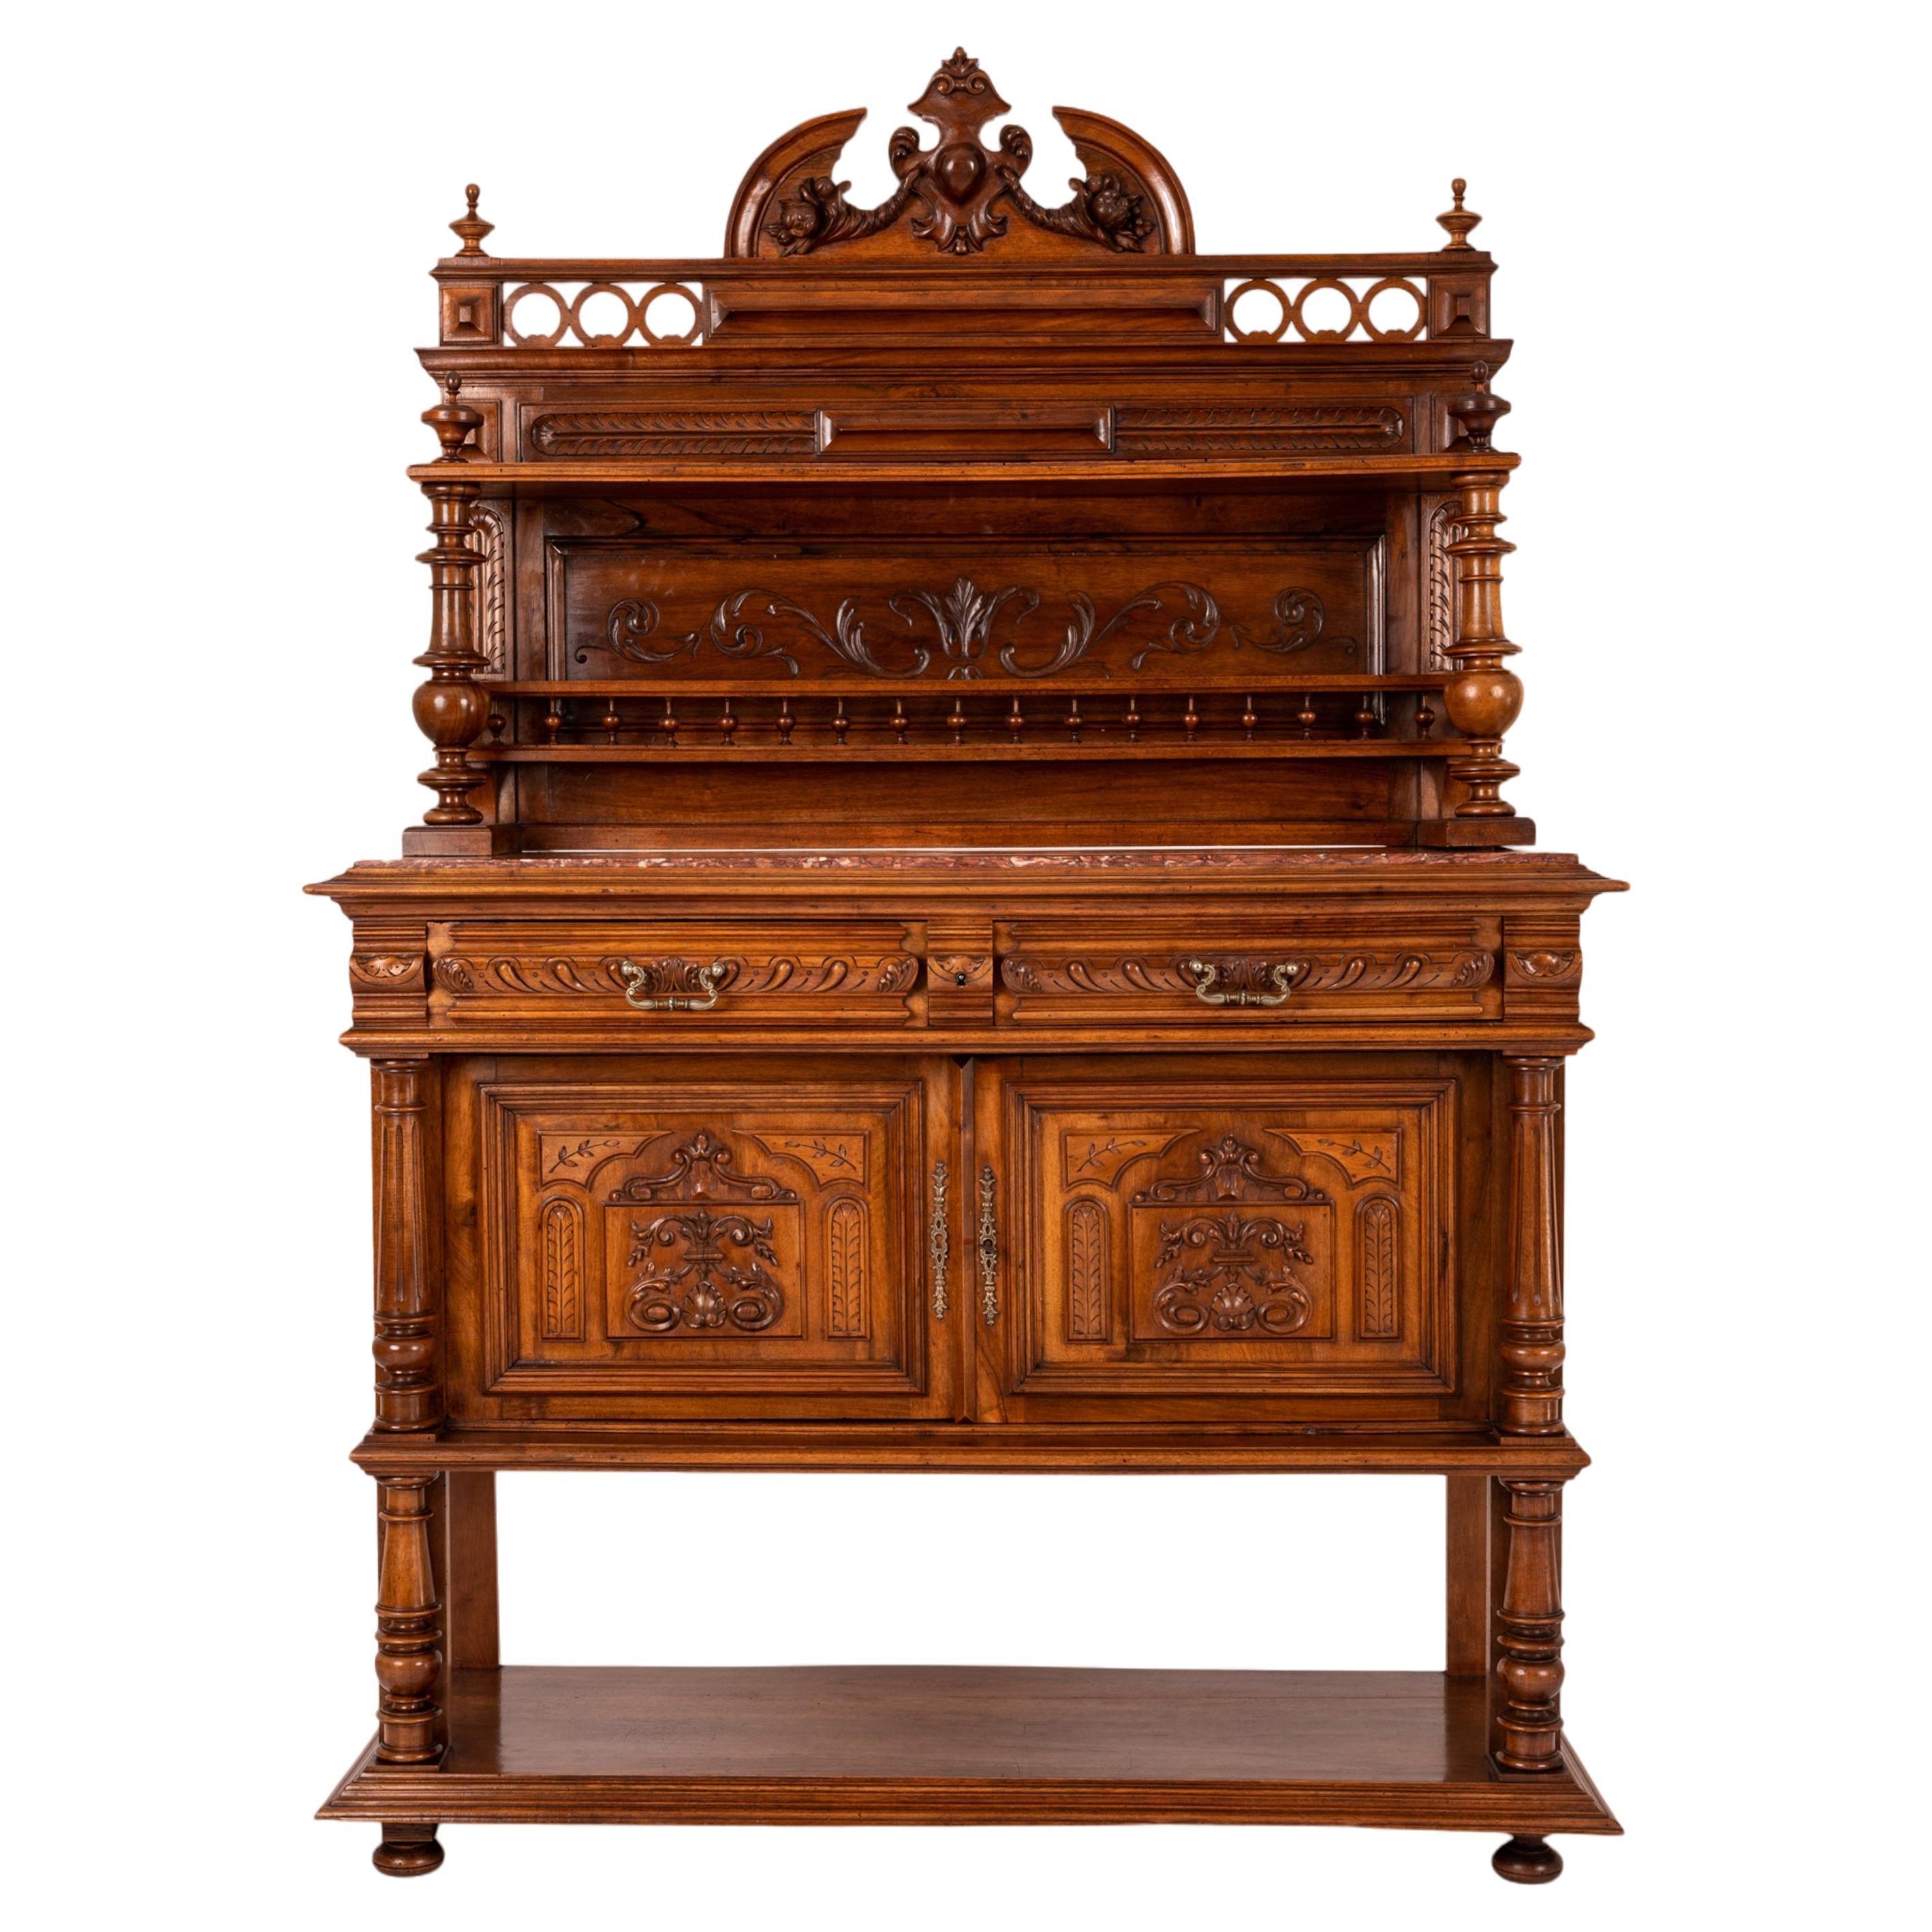 A very good antique French carved walnut dessert server, buffet, liquor cabinet in the Renaissance Revival taste, circa 1880.
The carved back with a crest of twin cornucopia and a carved Fleur-de-Lis, flanked by two pairs of turned finials with a